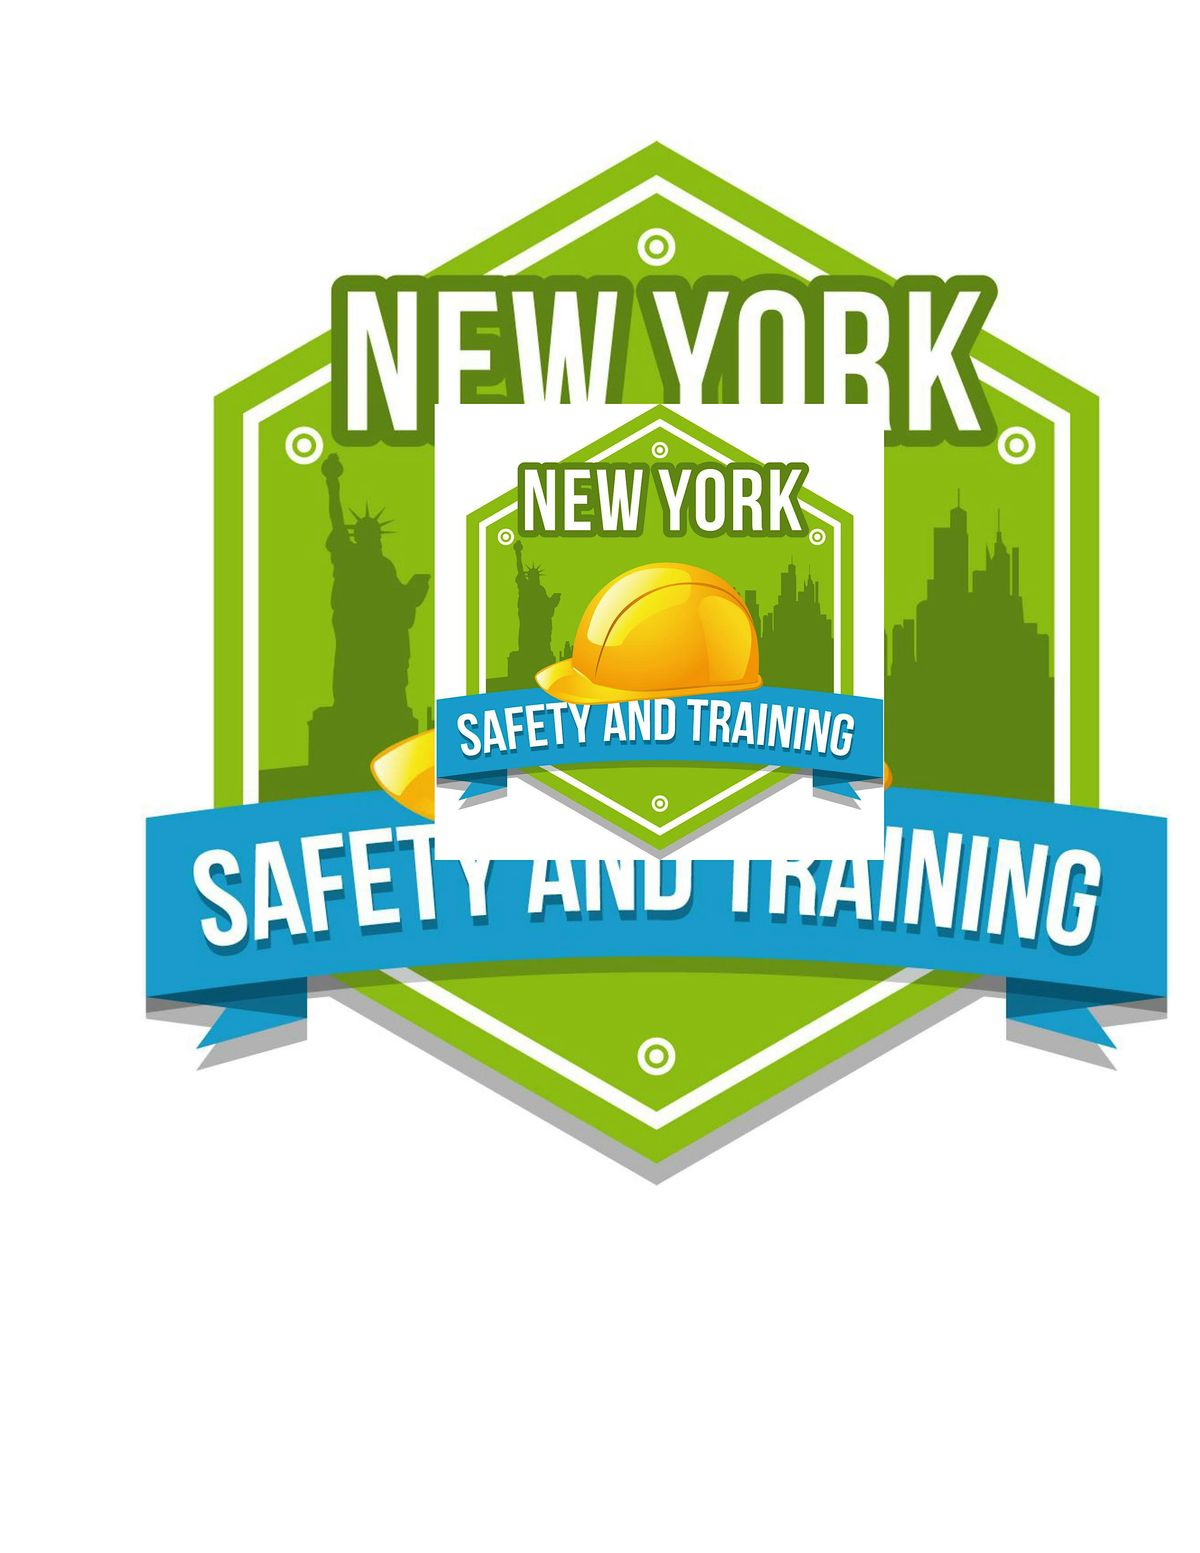 10-hour SST class in Brooklyn - Sat, May 25  (718) 734-8400